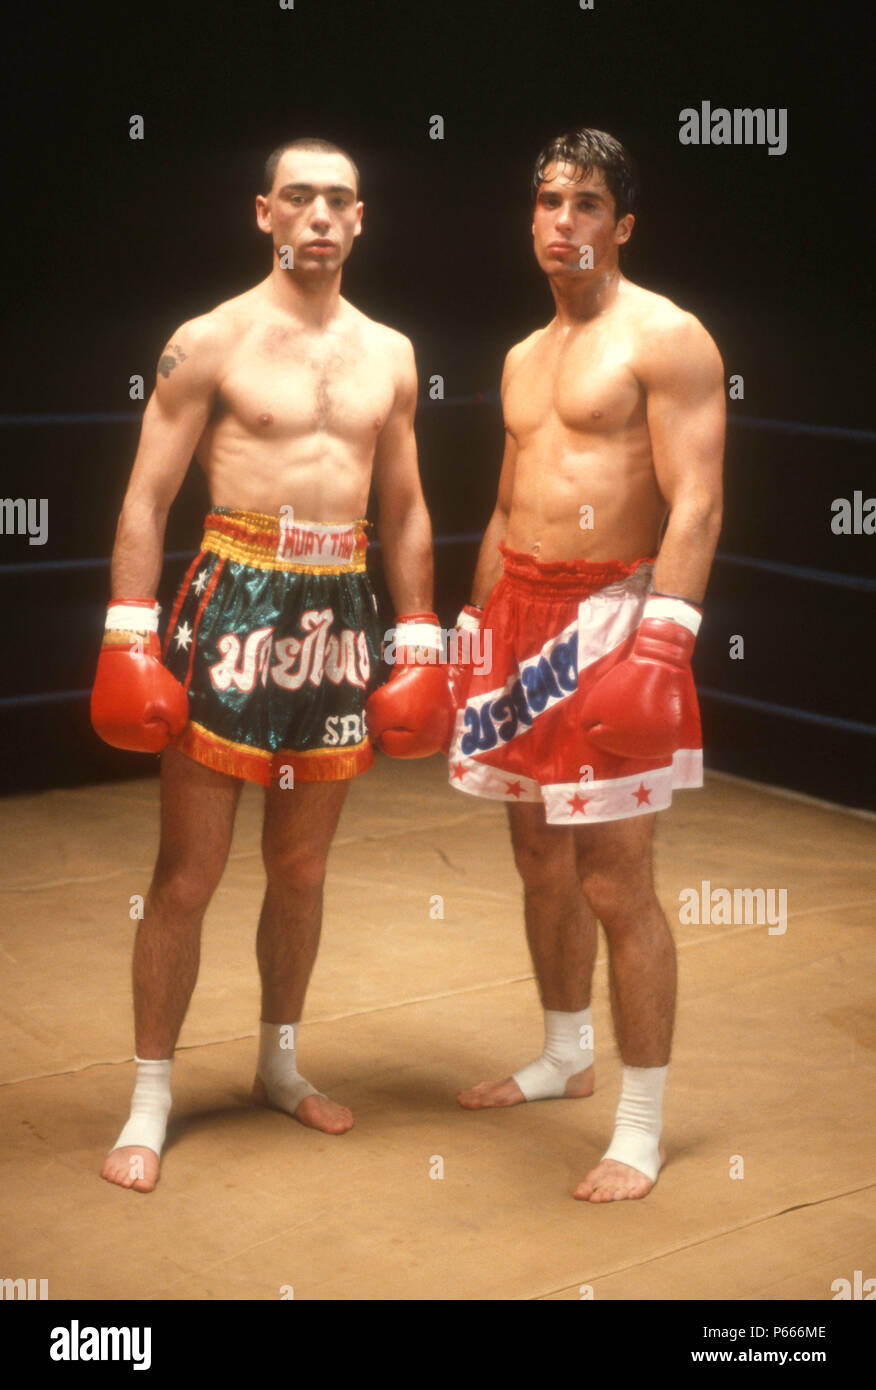 LOS ANGELES, CA - DECEMBER 7: (EXCLUSIVE) (L-R) Fighter Ronny Flas and Actor John Haymes Newton, aka John Newton on set of 'Desert Kickboxer' on December 7, 1991 in Los Angeles, California. Photo by Barry King/Alamy Stock Photo Stock Photo